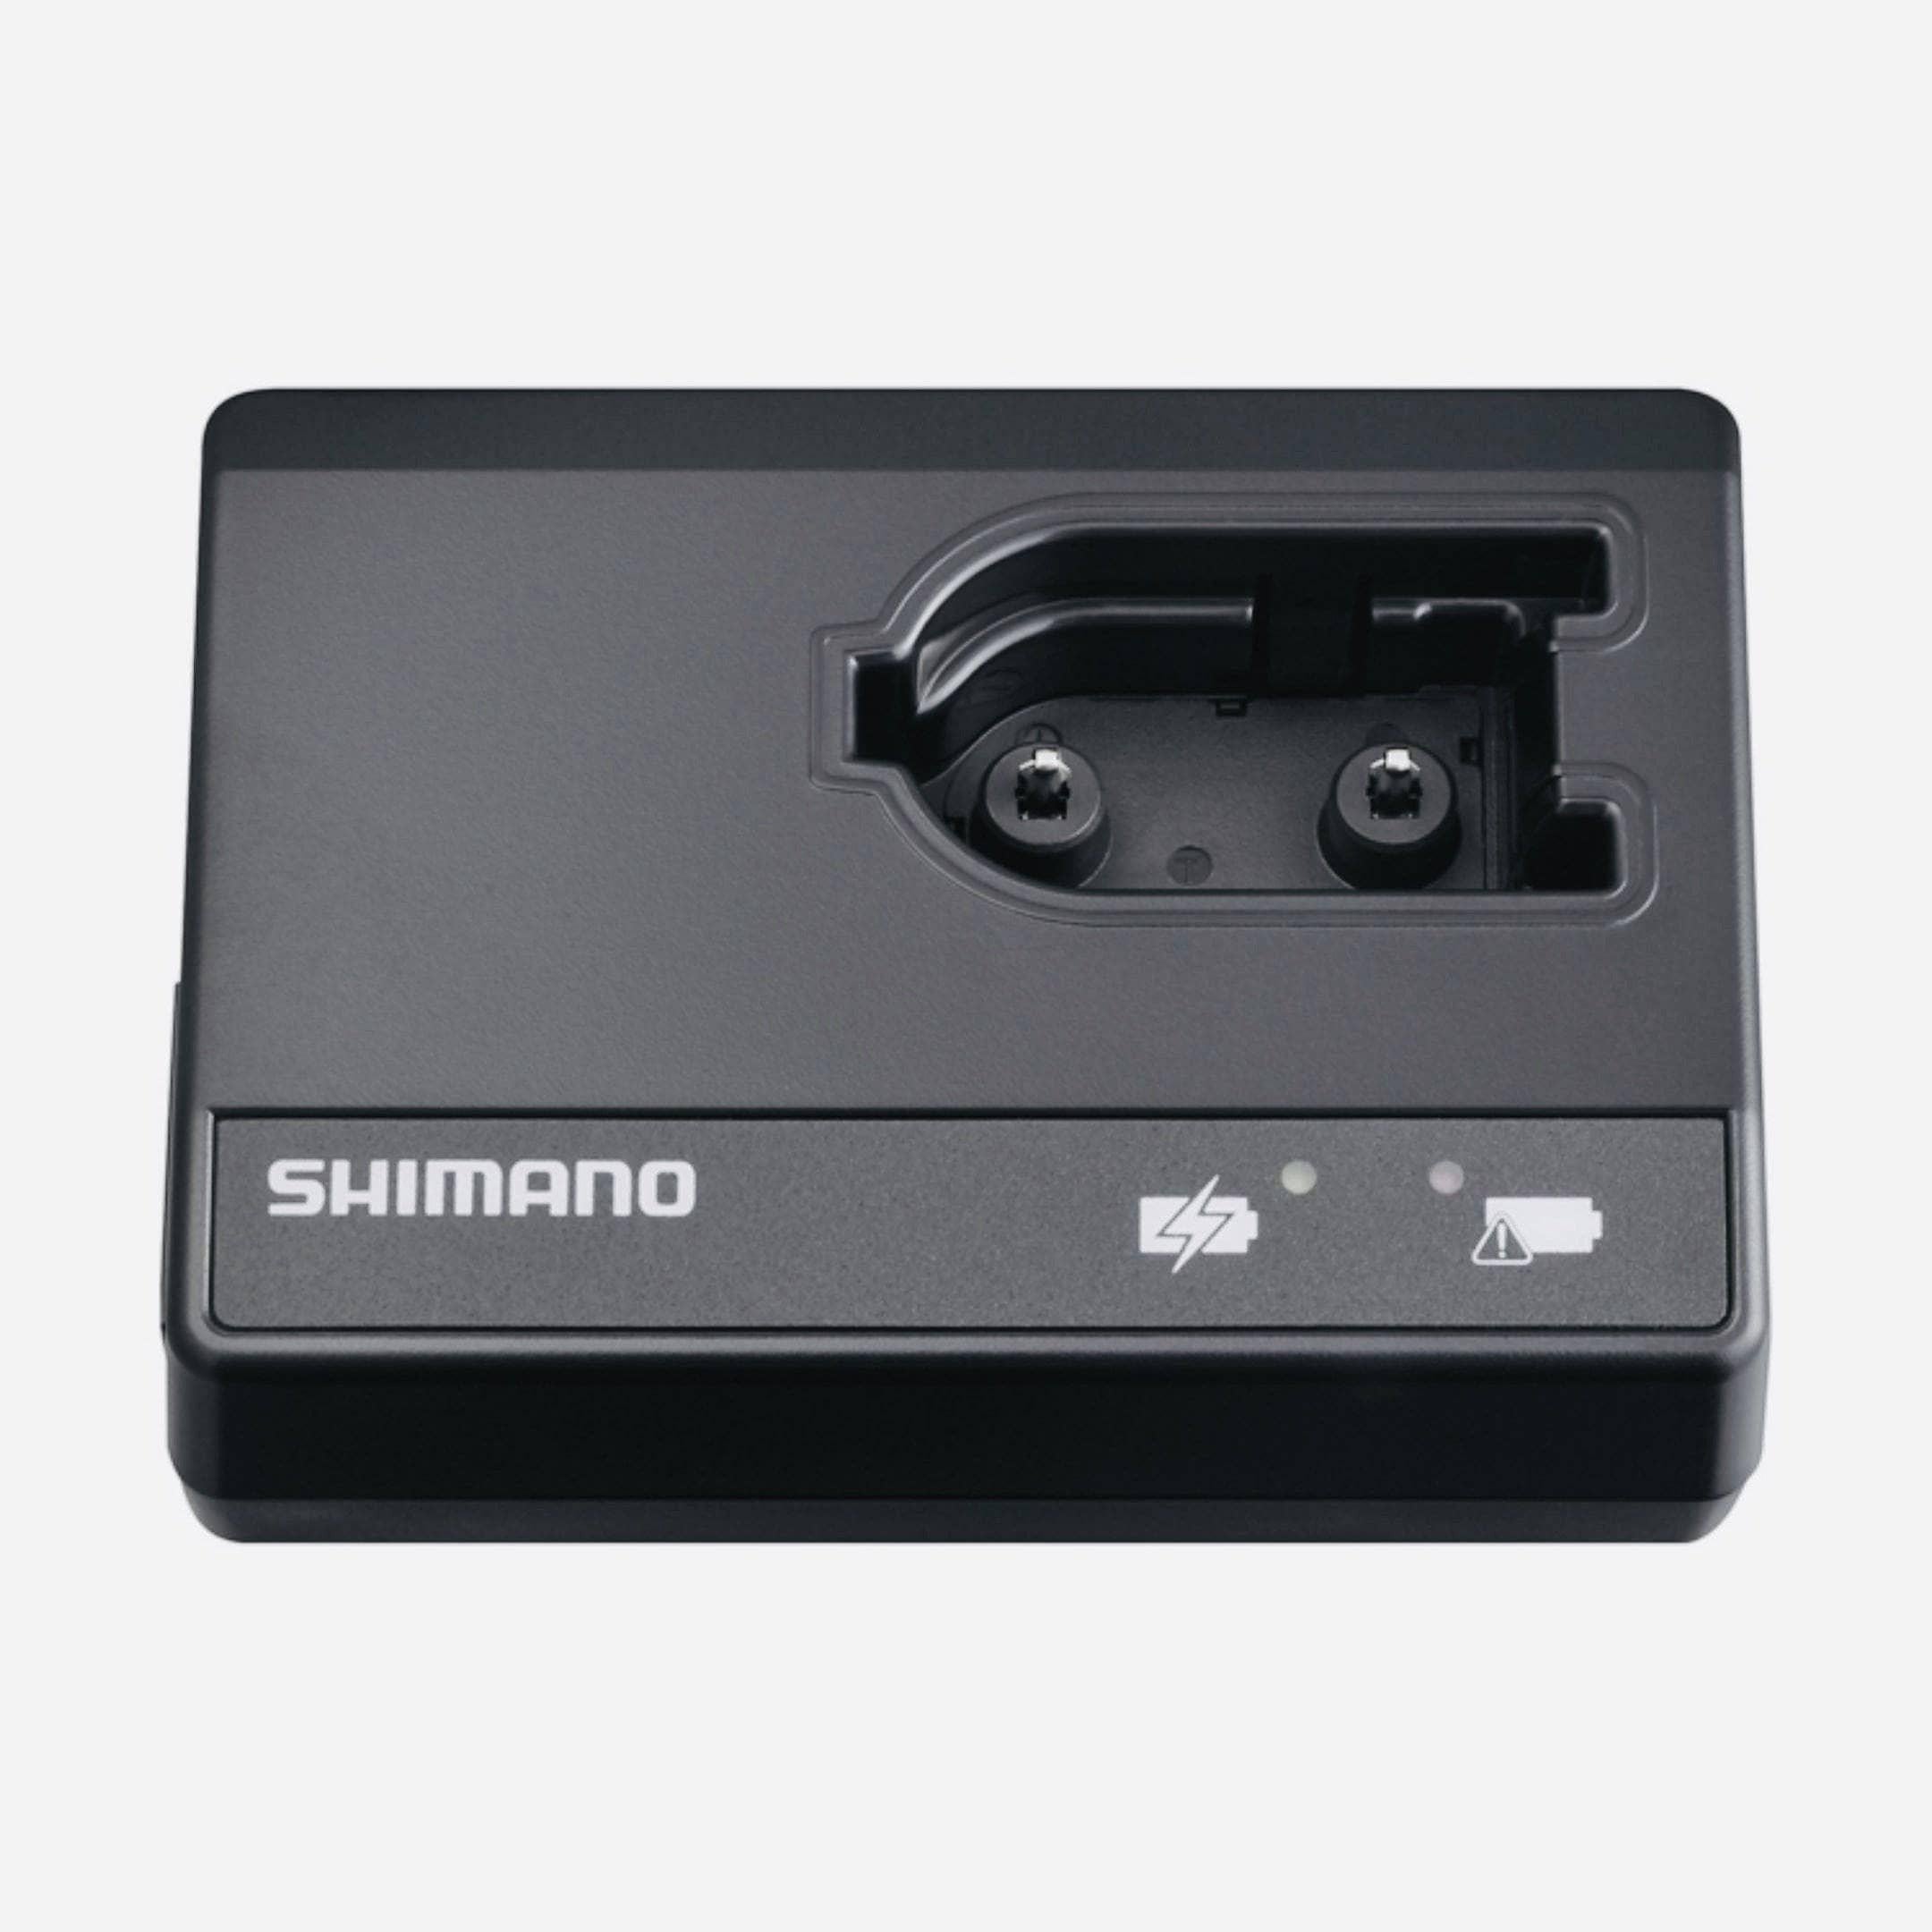 Shimano Di2 Battery Charger SM-BCR1 Parts - Electronic Shifting Components